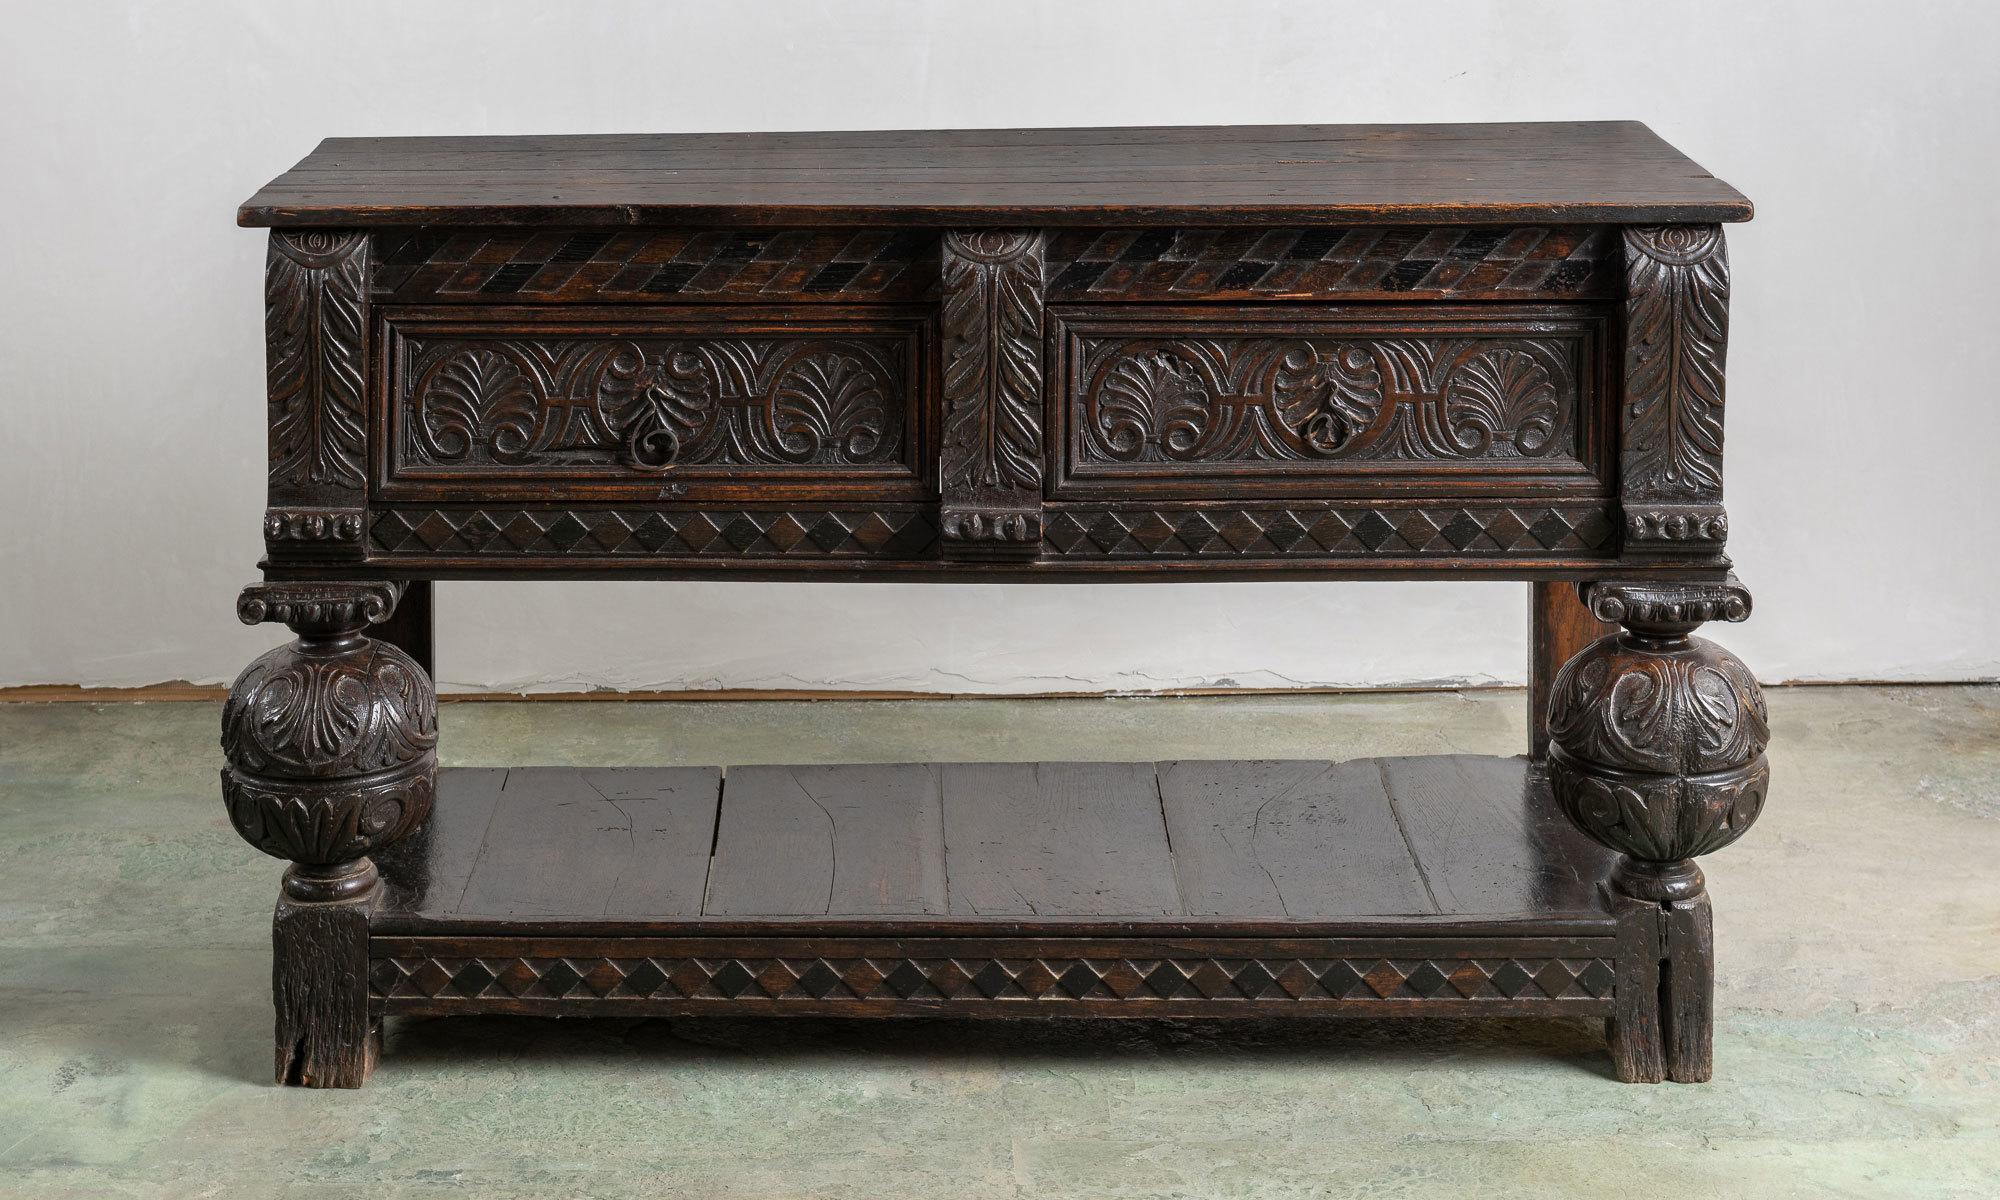 Renaissance Revival carved walnut console table, circa 19th century

Astonishing piece in rich walnut with hand-carved patterned detailing throughout.

This piece ships from Providence, Rhode Island.